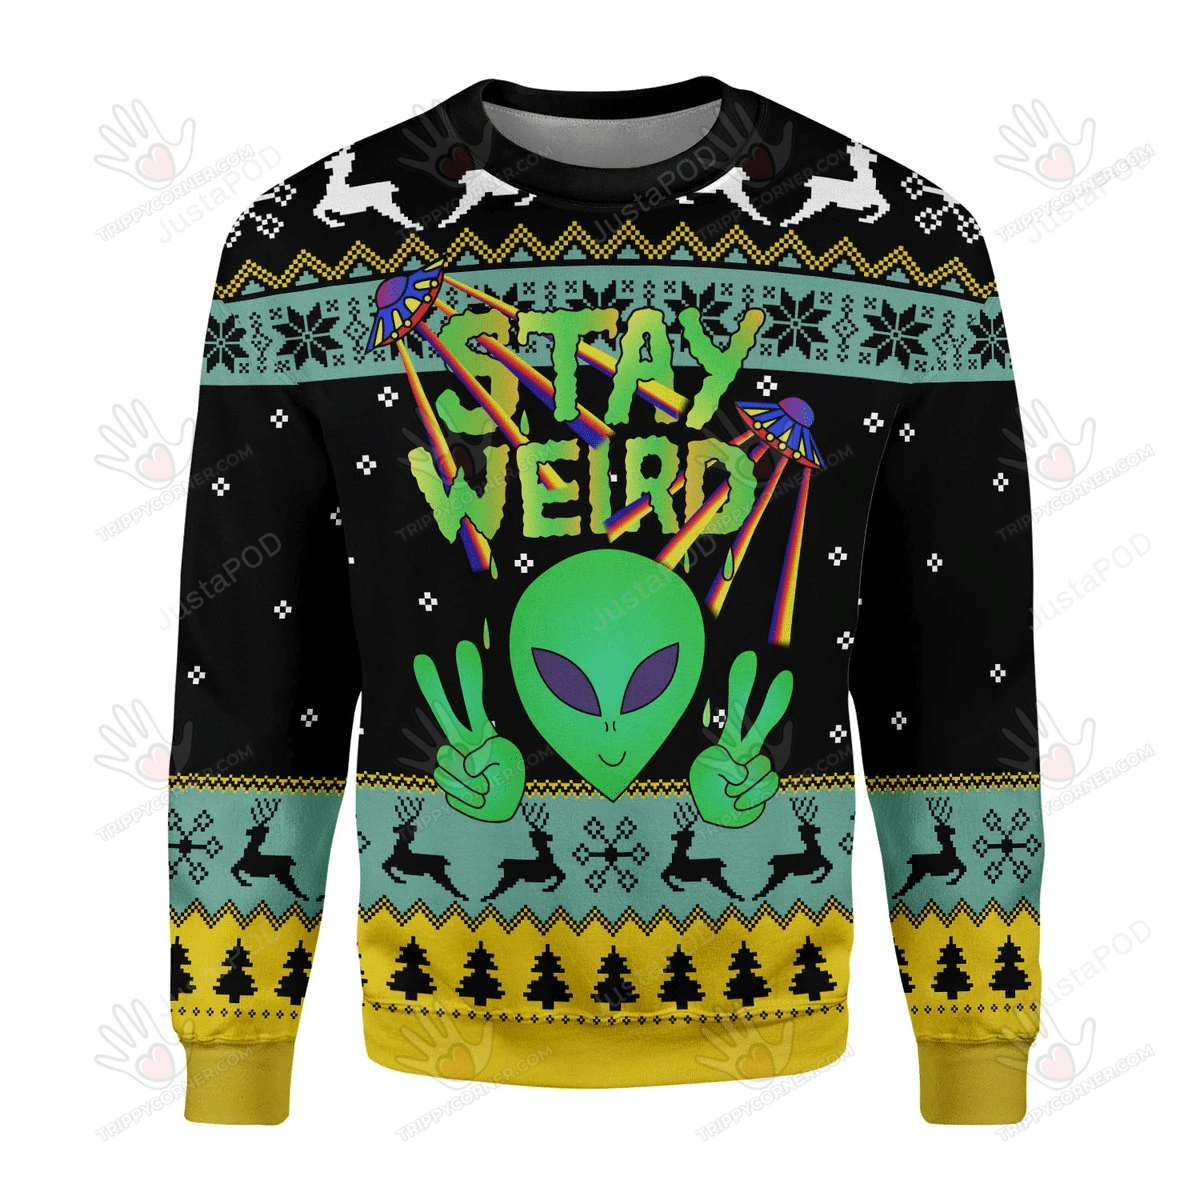 Stay Weird Alien Ugly Christmas Sweater, All Over Print Sweatshirt, Ugly Sweater Christmas Gift